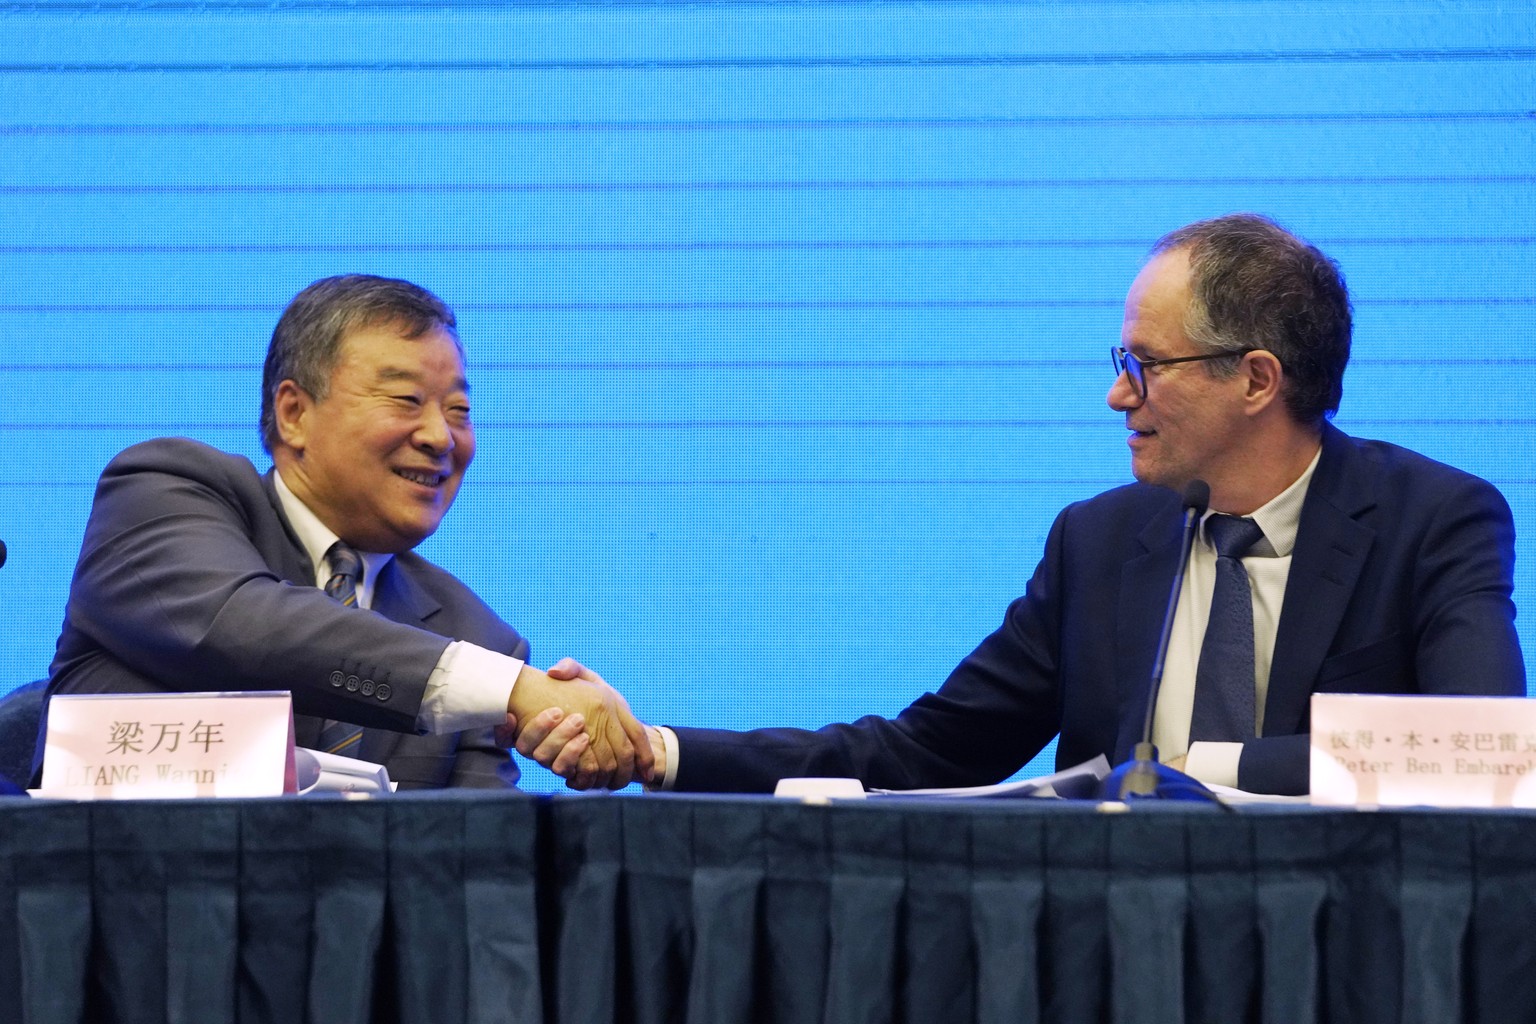 Peter Ben Embarek, of the World Health Organization team, right, shakes hands with his Chinese counterpart Liang Wannian after a WHO-China Joint Study Press Conference held at the end of the WHO missi ...